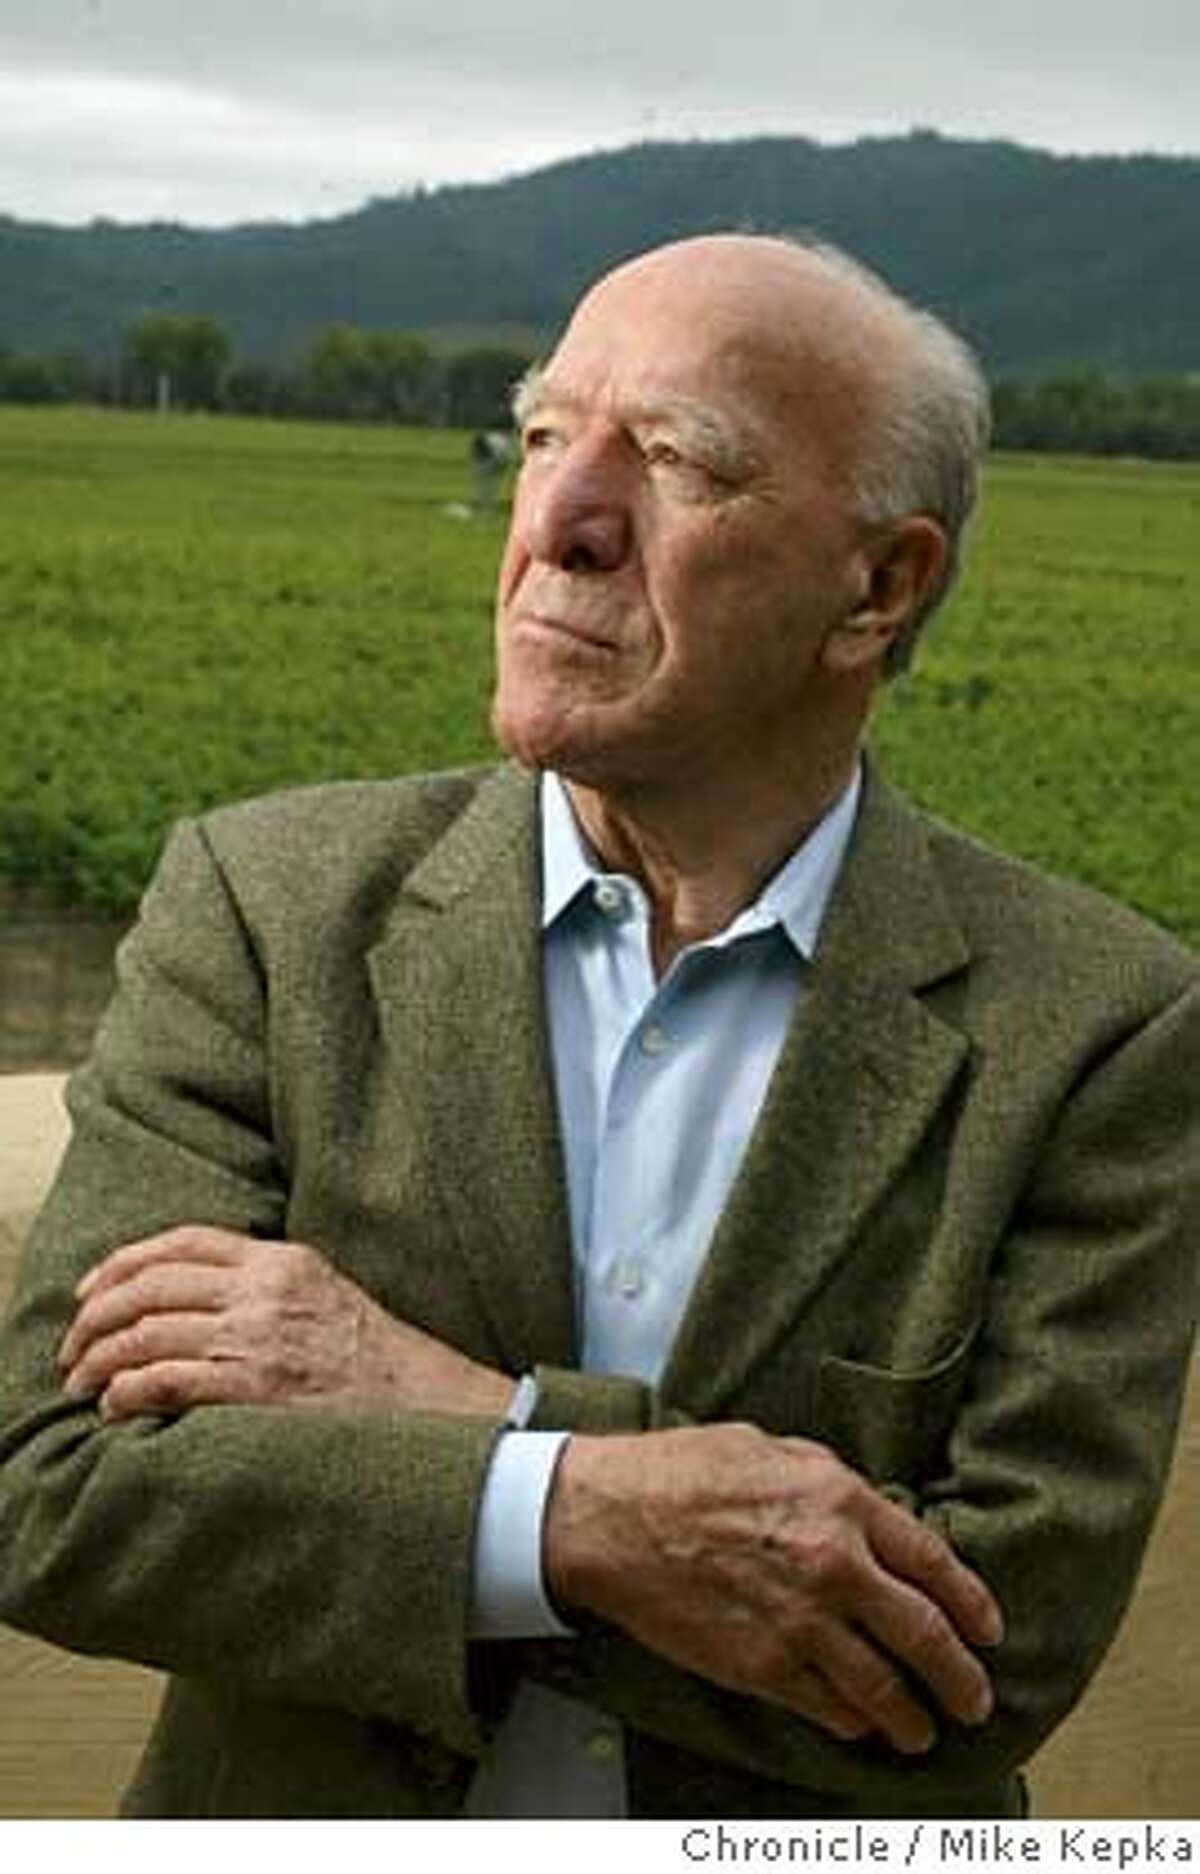 ###Live Caption:mondavi095_mk.jpg Robert Mondavi will turn be turn 90 on June18, 2003. He is the owner of a wine empire famous throughout the world. 6/9/03 in Oakville. MIKE KEPKA / The San Francisco Chronicle###Caption History:mondavi095_mk.jpg Robert Mondavi will turn be turn 90 on June18, 2003. He is the owner of a wine empire famous throughout the world. 6/9/03 in Oakville. MIKE KEPKA / The San Francisco Chronicle###Notes:###Special Instructions:MANADATORY CREDIT FOR PHOTOG AND SF CHRONICLE/ NO SALES-MAGS OUT